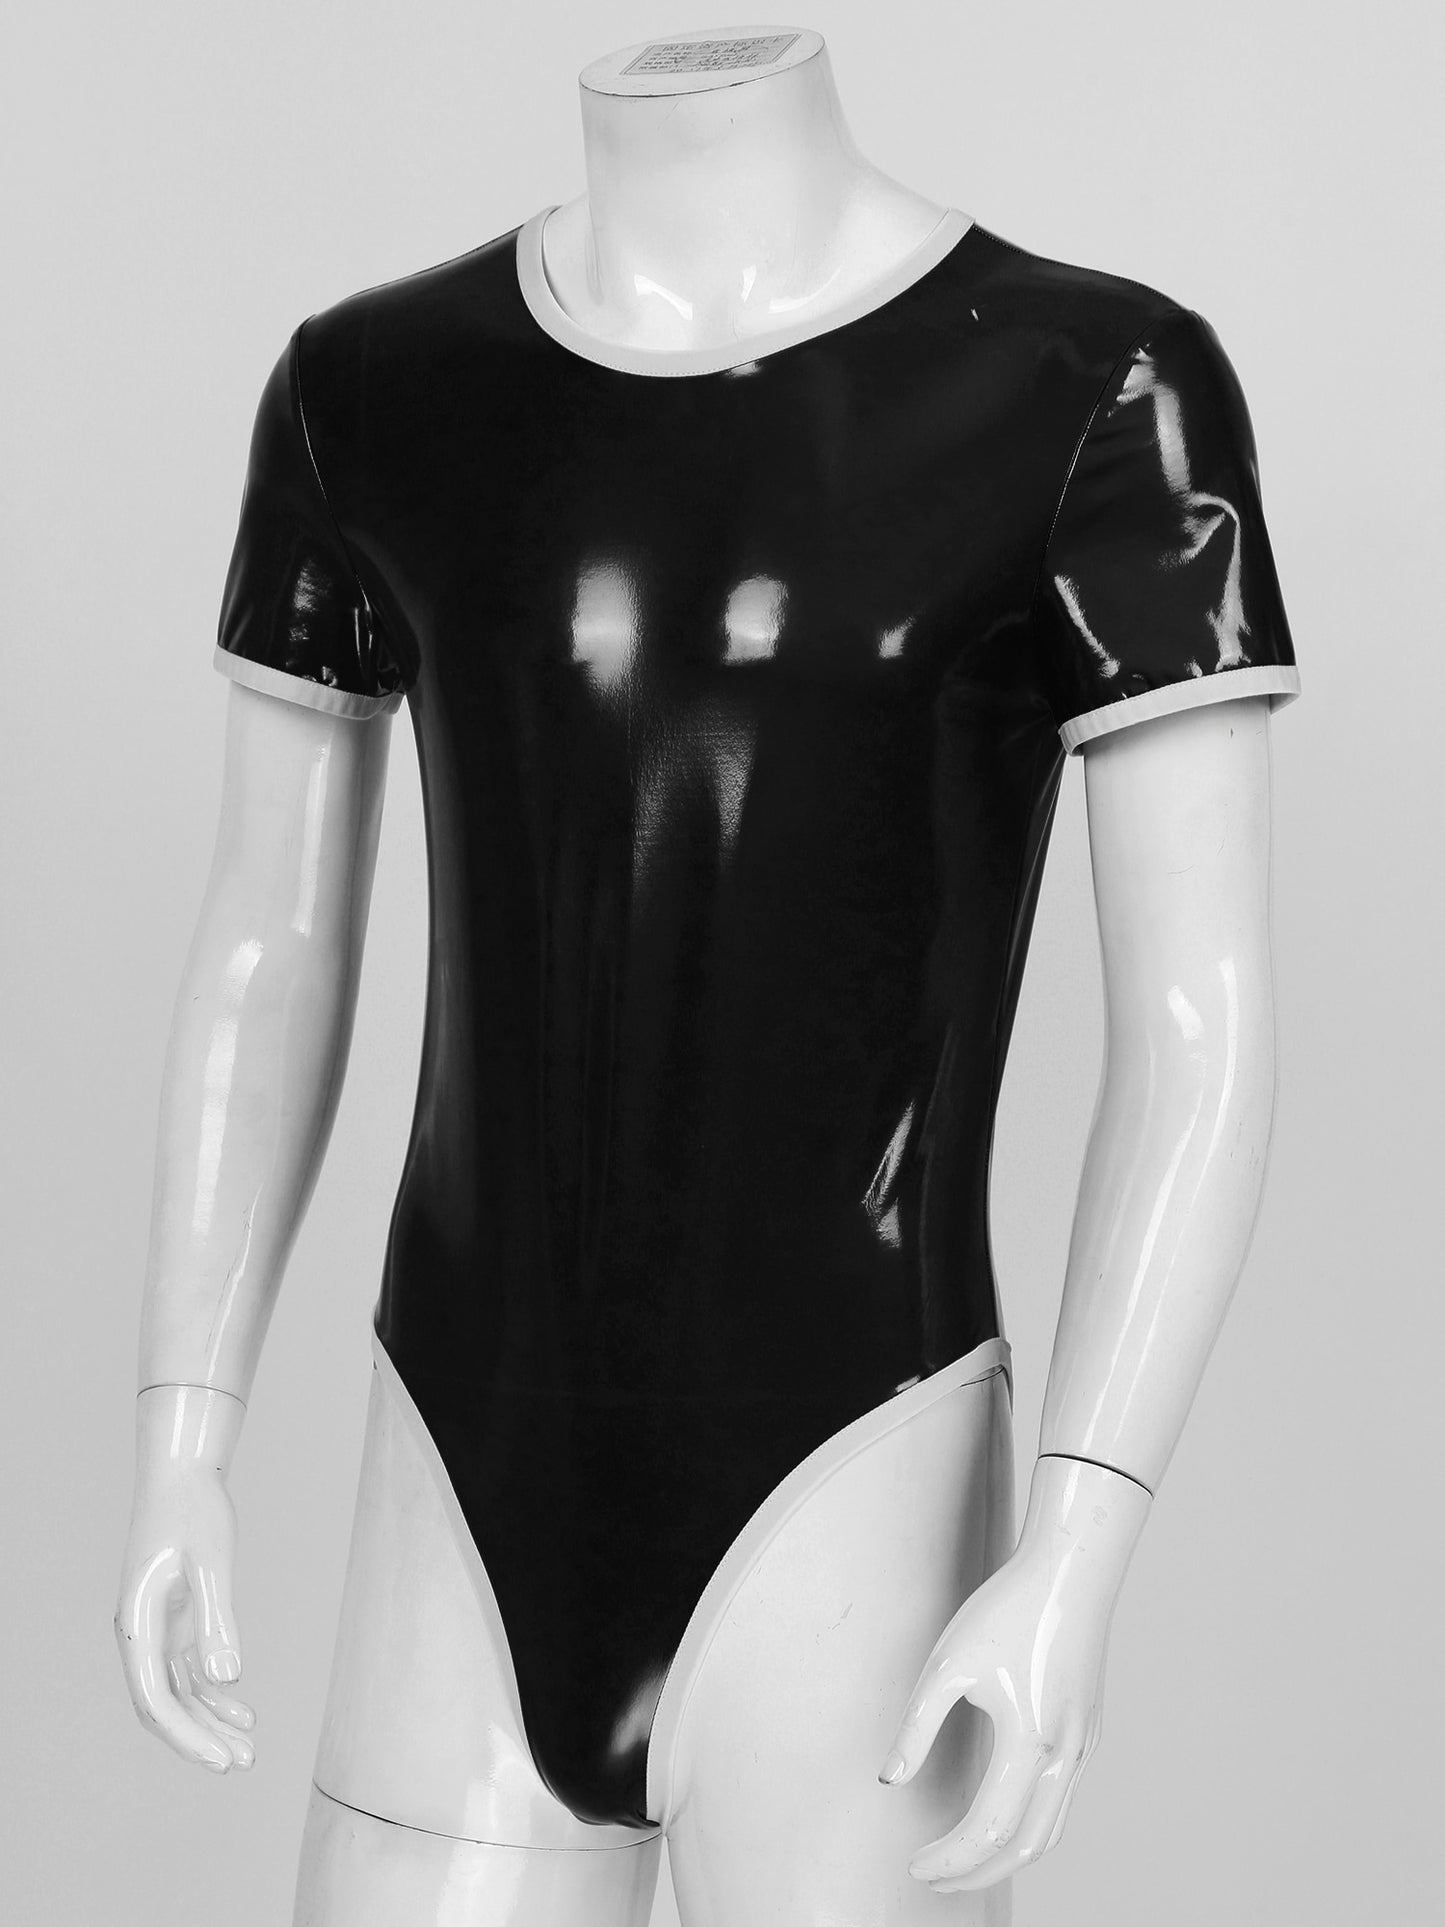 Patent Leather Bodysuit: Sexy Male Sissy Leotard for Parties